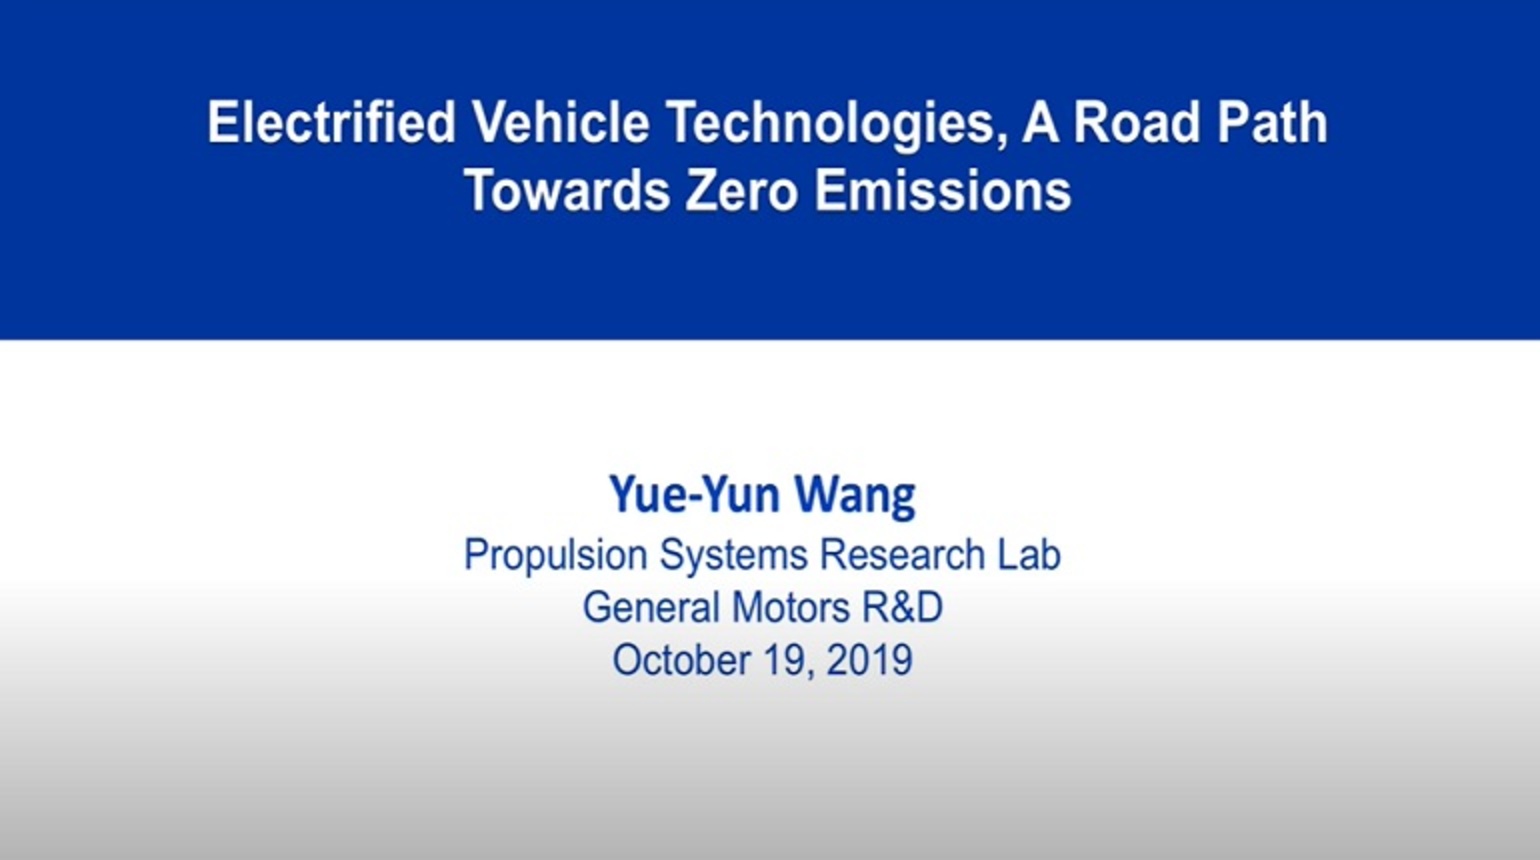 Electrified Vehicle Technologies, A Road Path Towards Zero Emissions